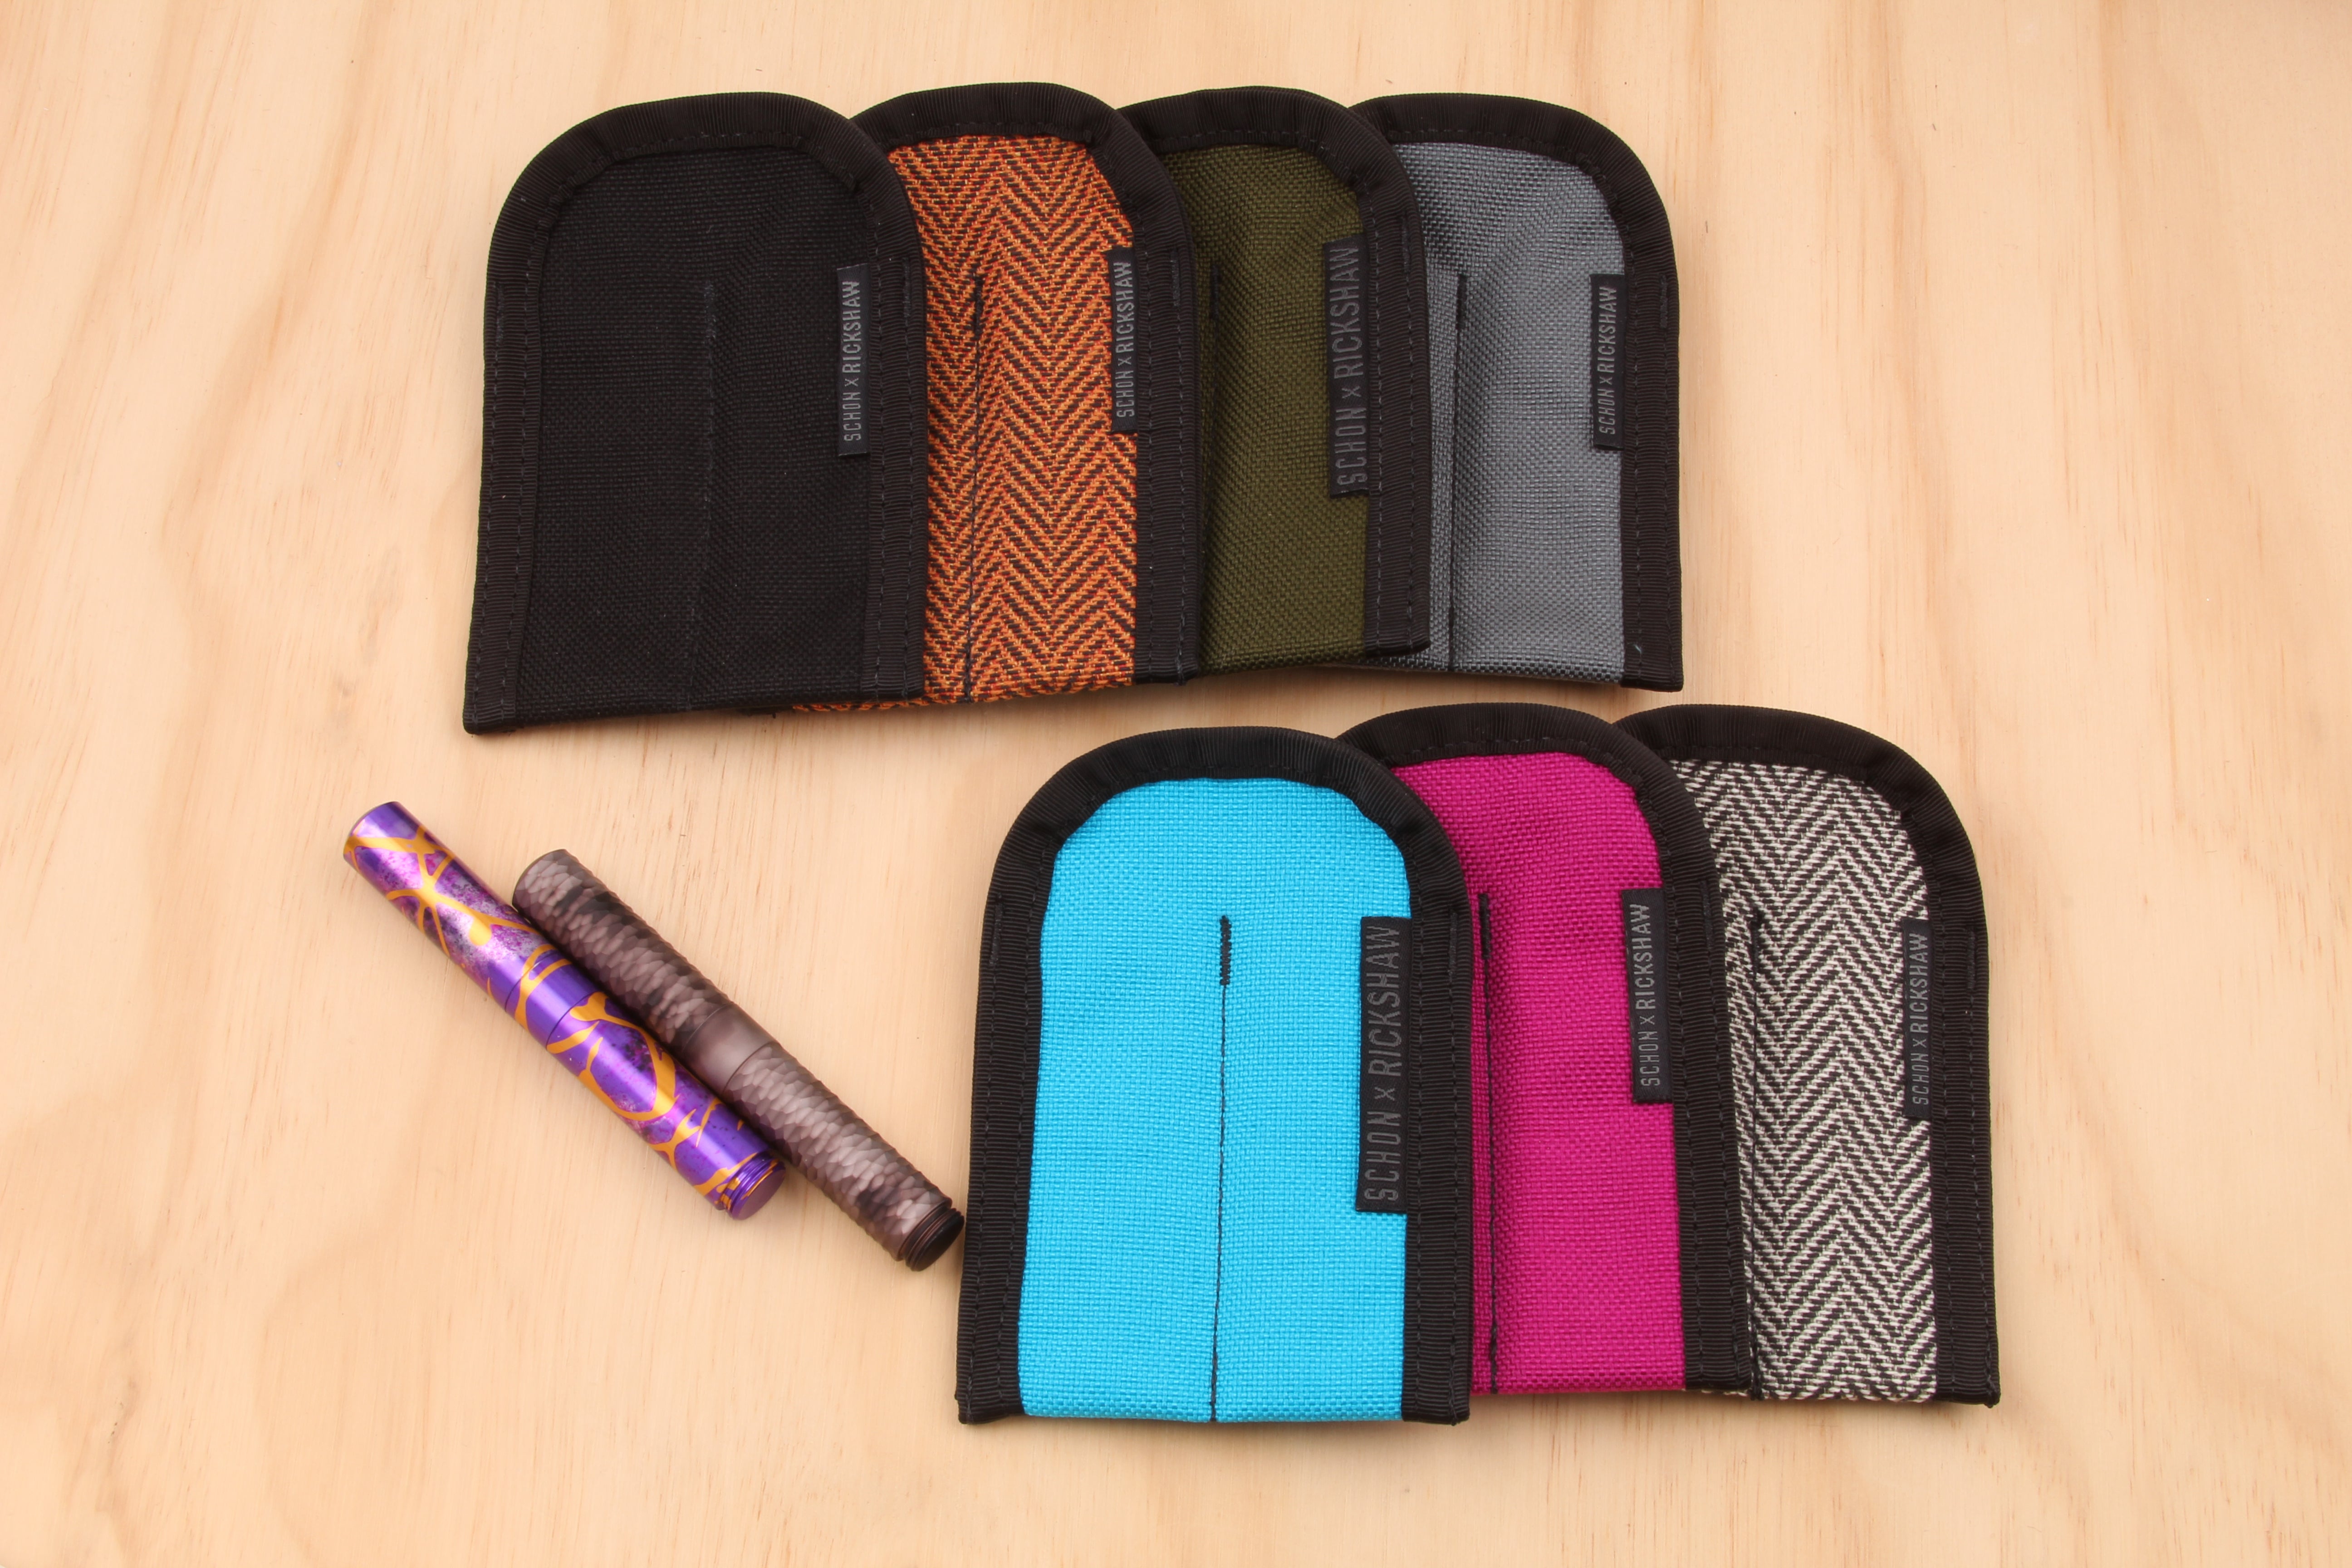 Pen Cases and Sleeves